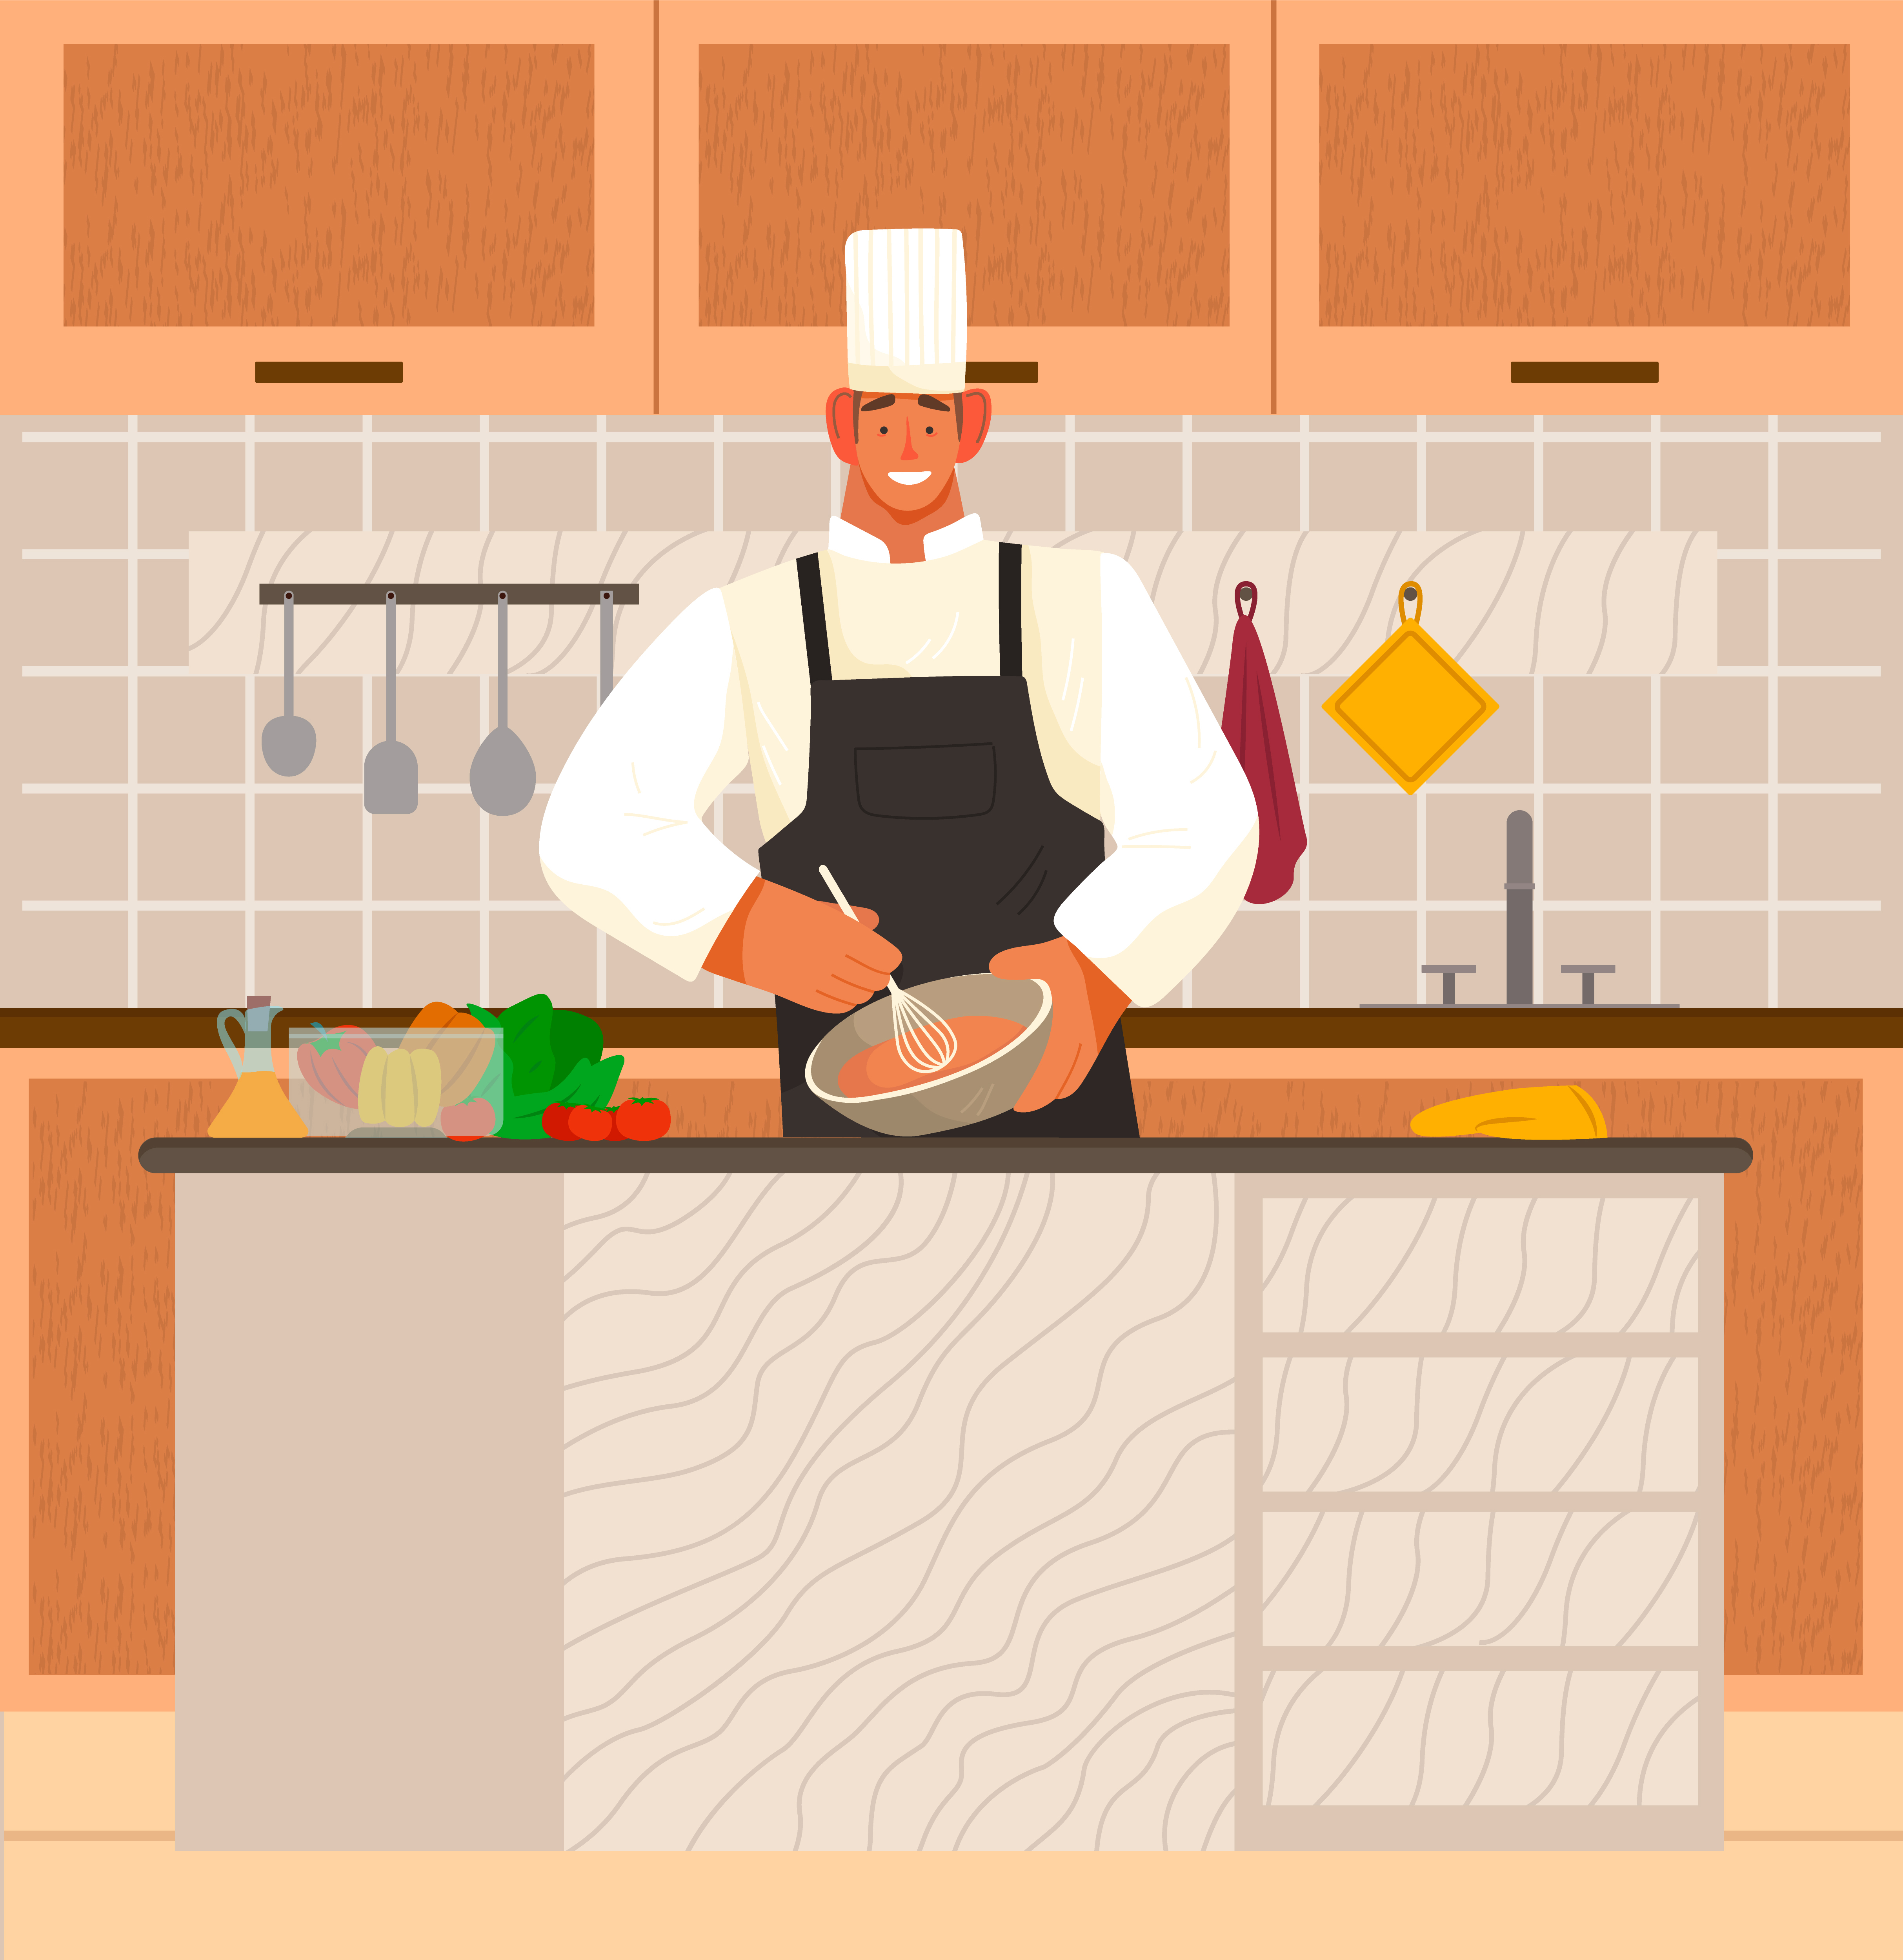 Man stand by table in kitchen at home or restaurant. Chef cook meal from products on desk. Interior with wooden surfaces and shelves with kitchenware and plates. Vector illustration of cooking process. Chef Cooking in Kitchen at Home or Restaurant